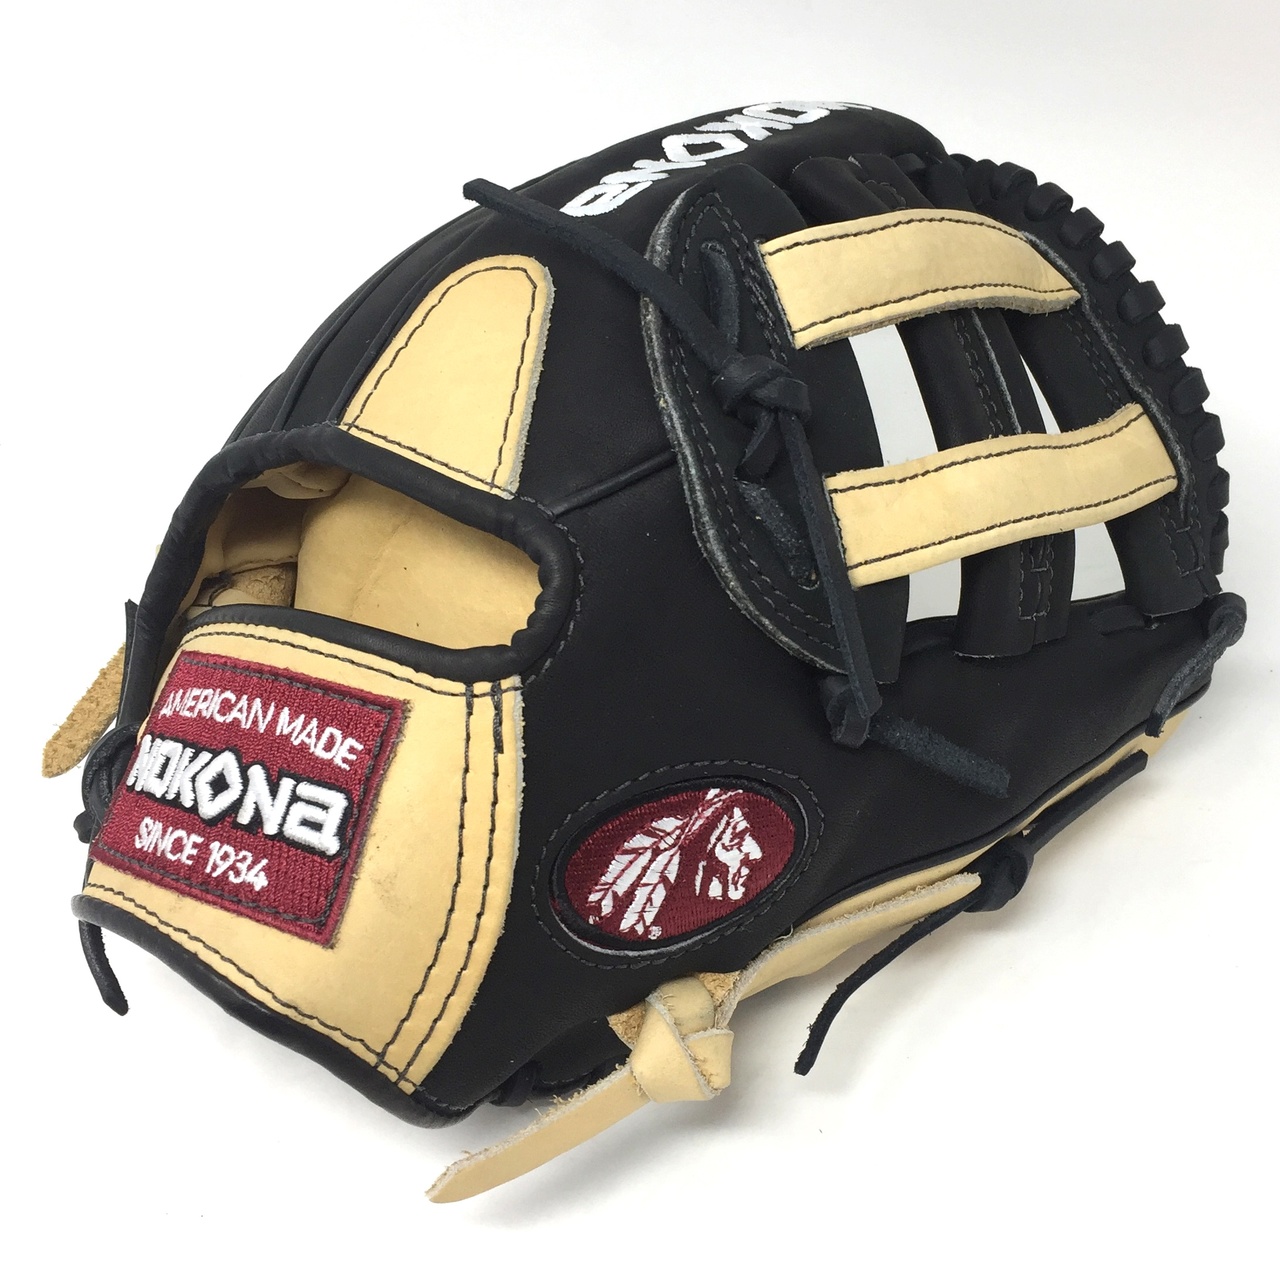 nokona-bison-black-alpha-baseball-glove-s-1150hb-11-5-right-hand-throw S-1150HB-RightHandThrow Nokona 808808893264 <p>Young Adult Glove made of American Bison and Super soft Steerhide